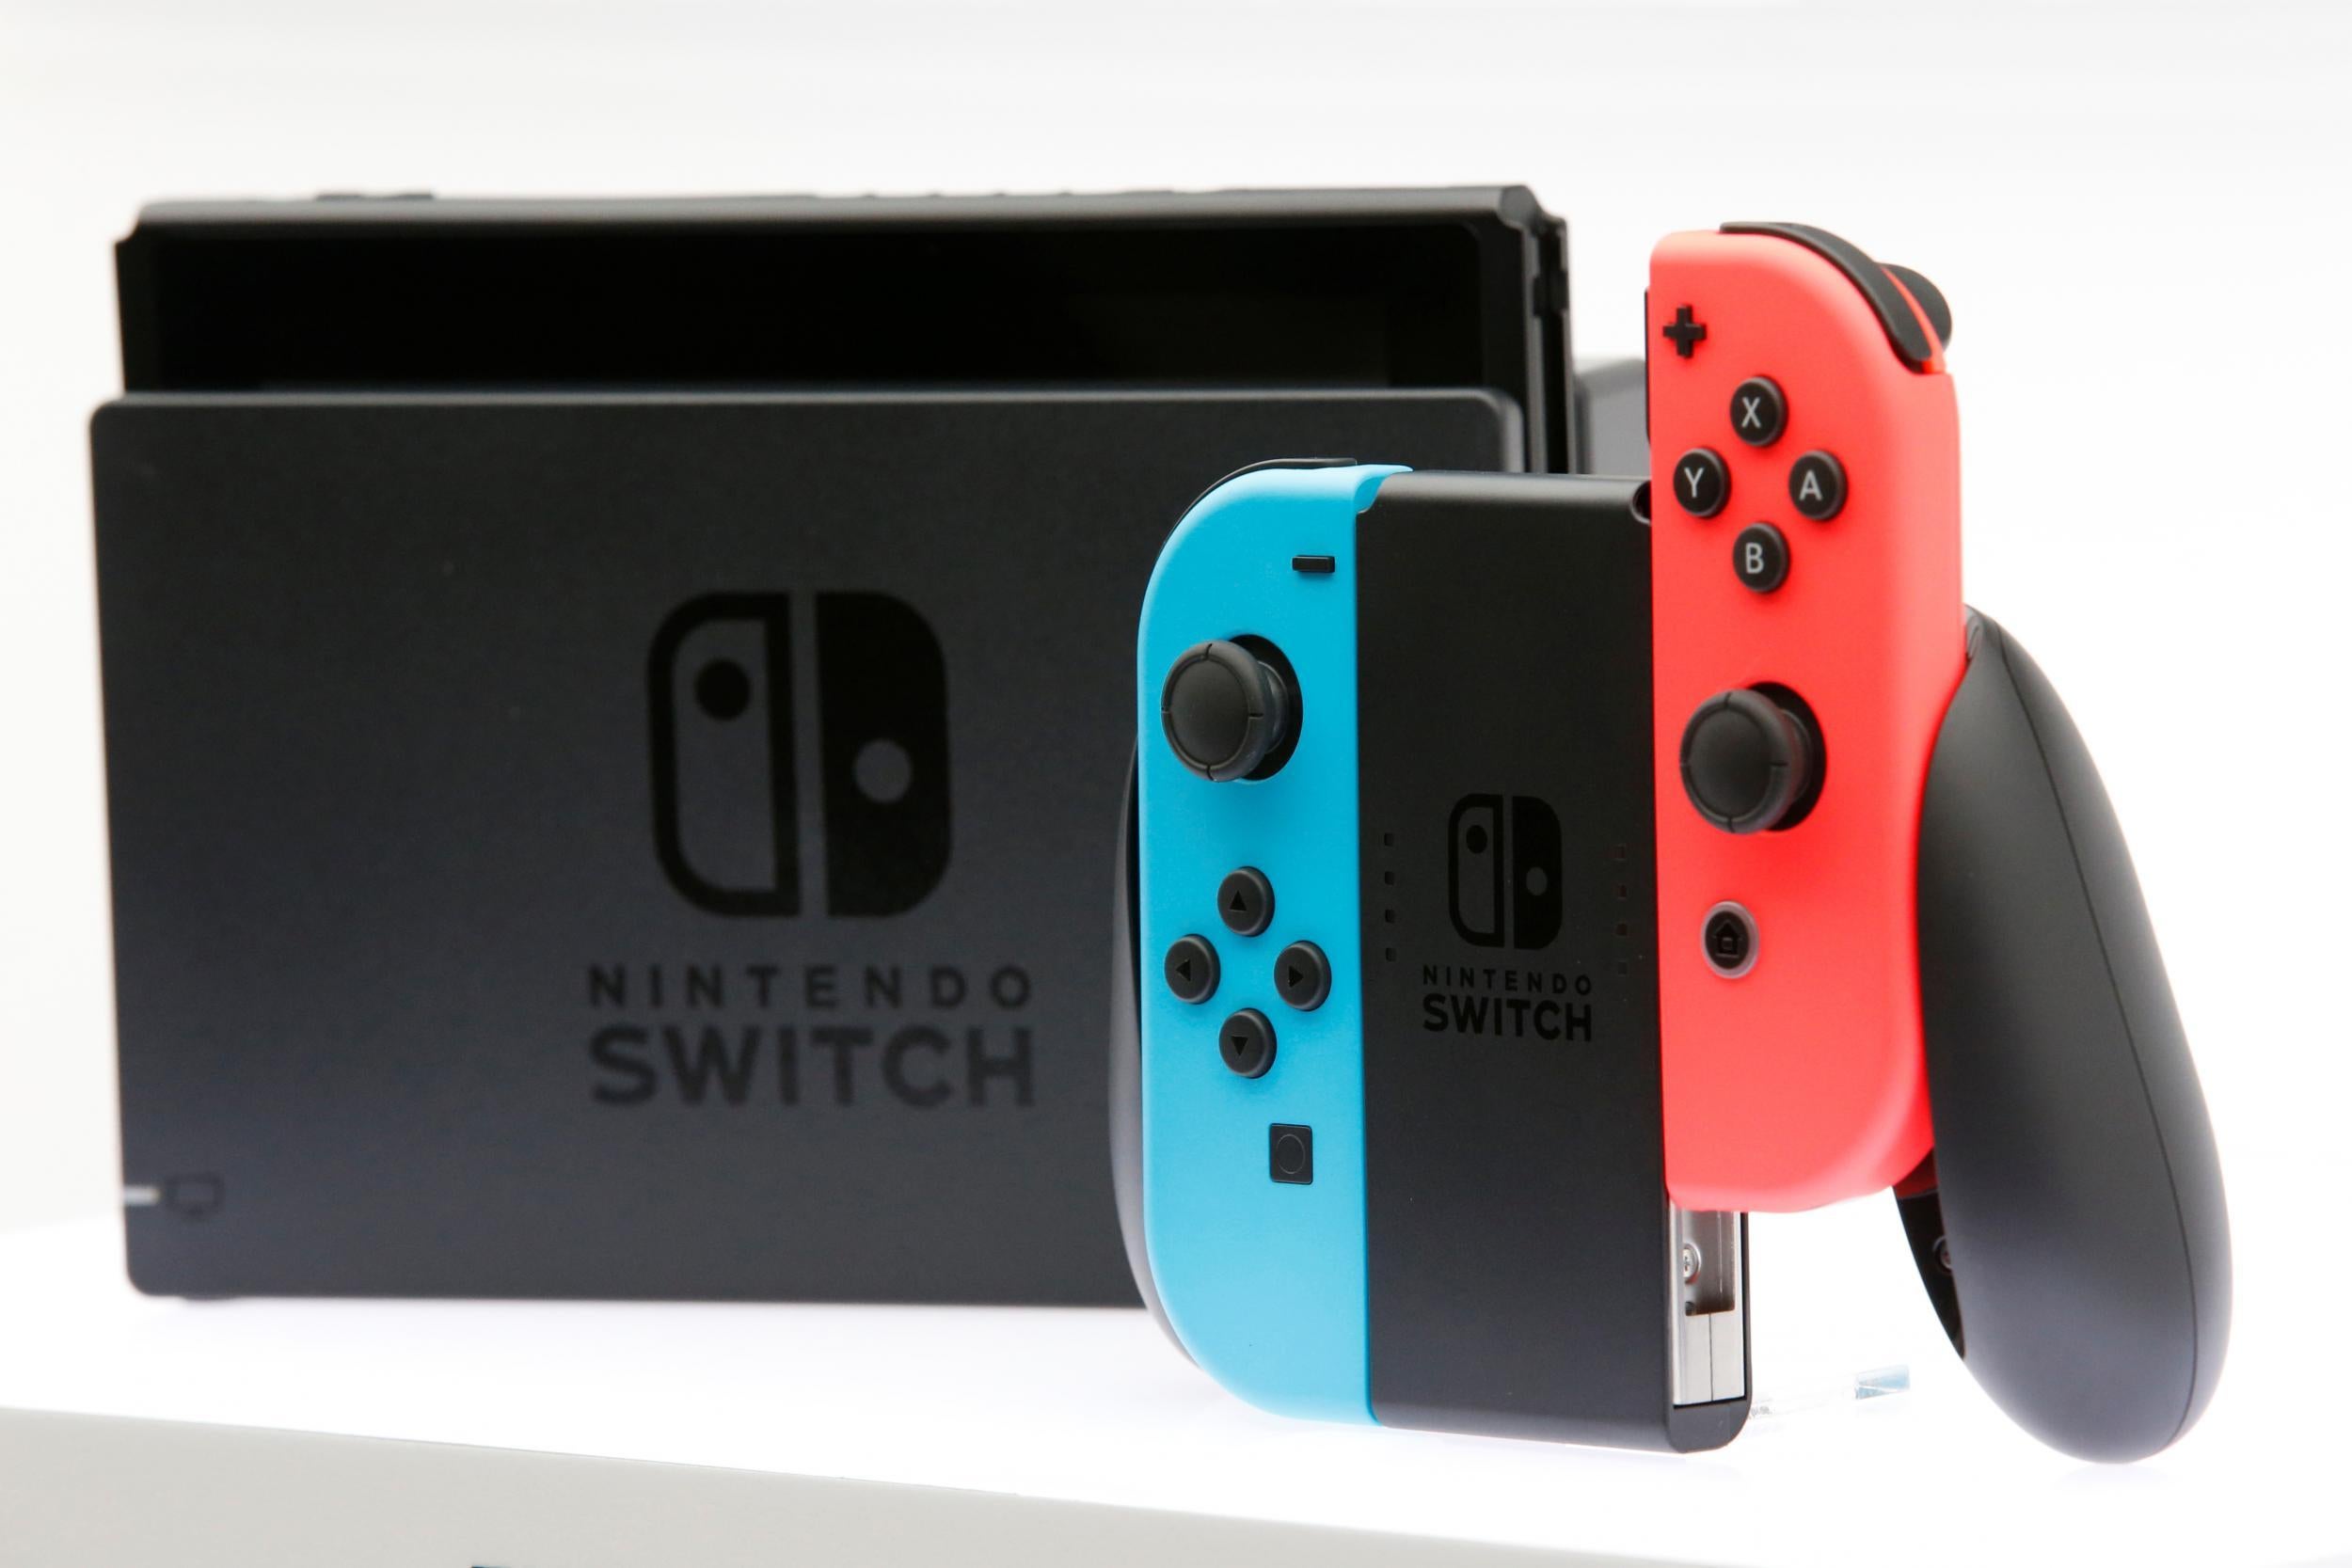 Nintendo's new game console Switch is pictured after its presentation ceremony in Tokyo, Japan January 13, 2017